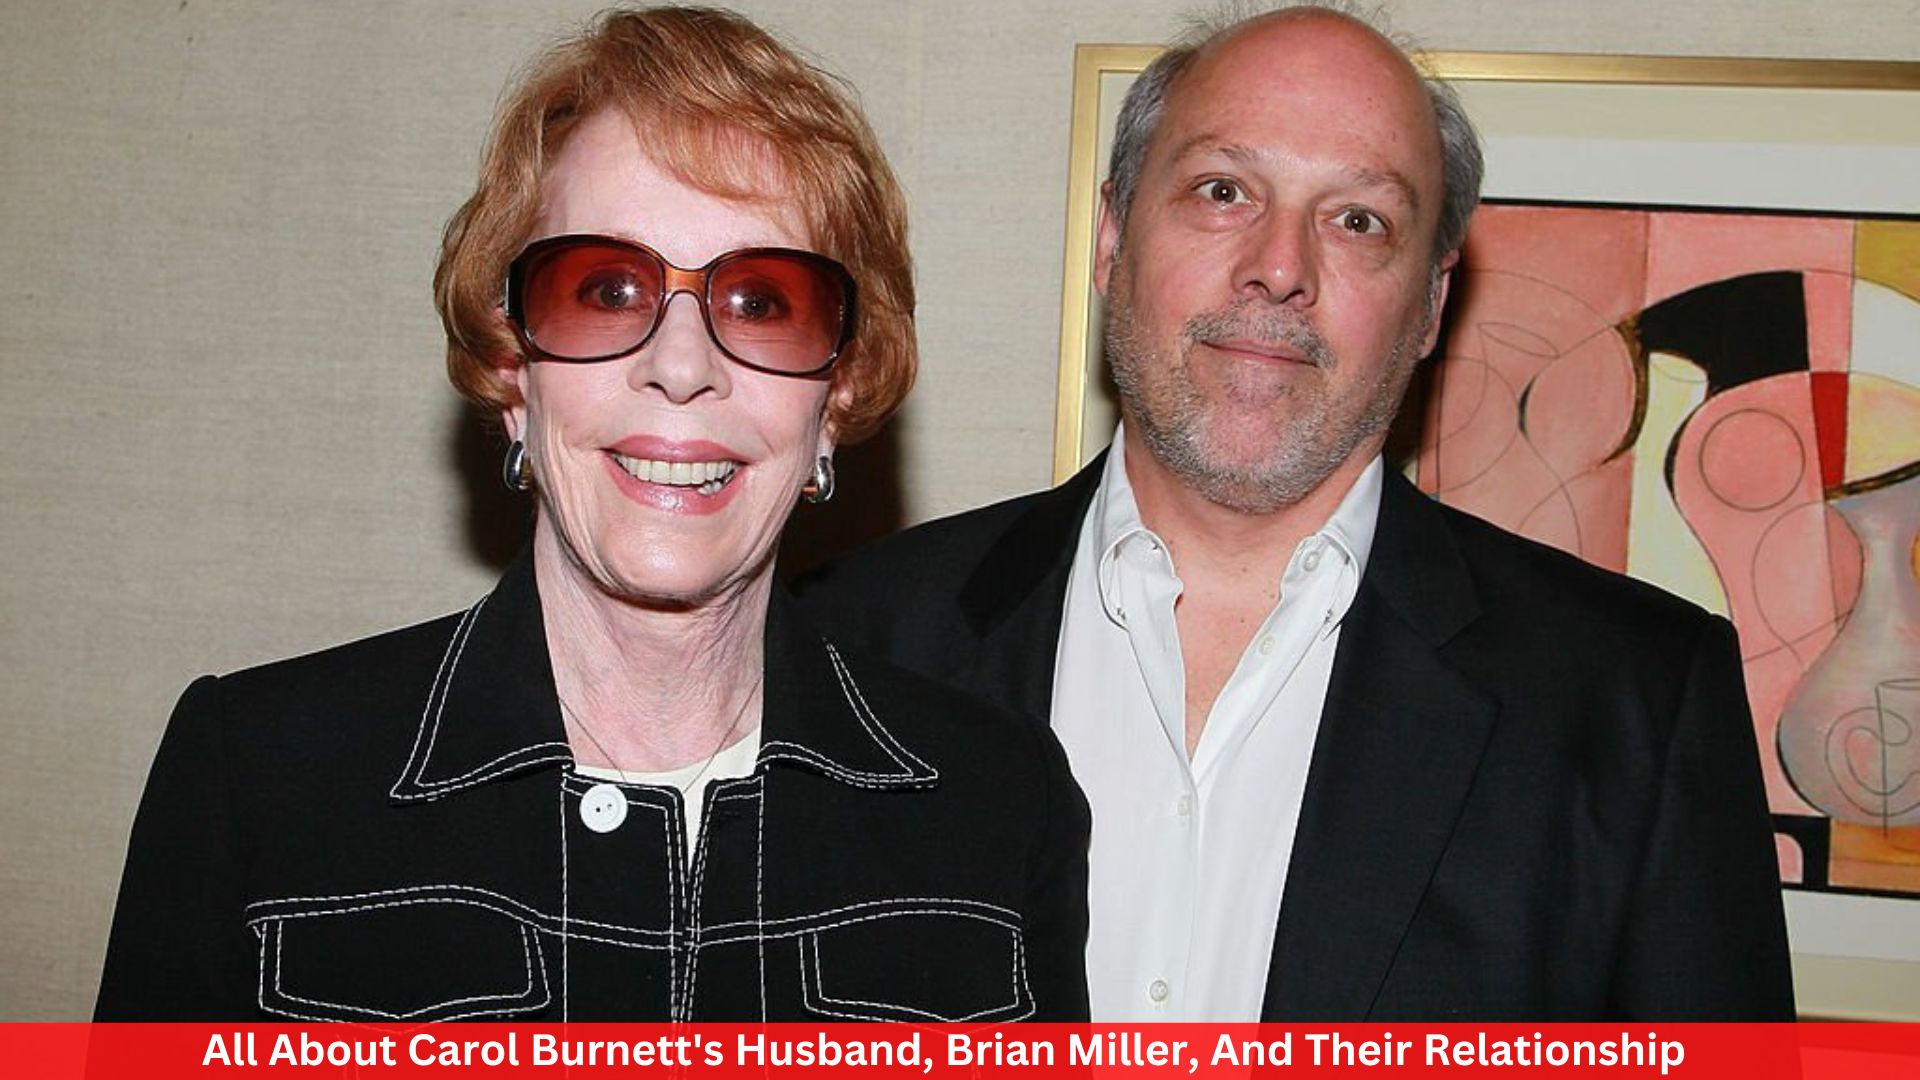 All About Carol Burnett's Husband, Brian Miller, And Their Relationship